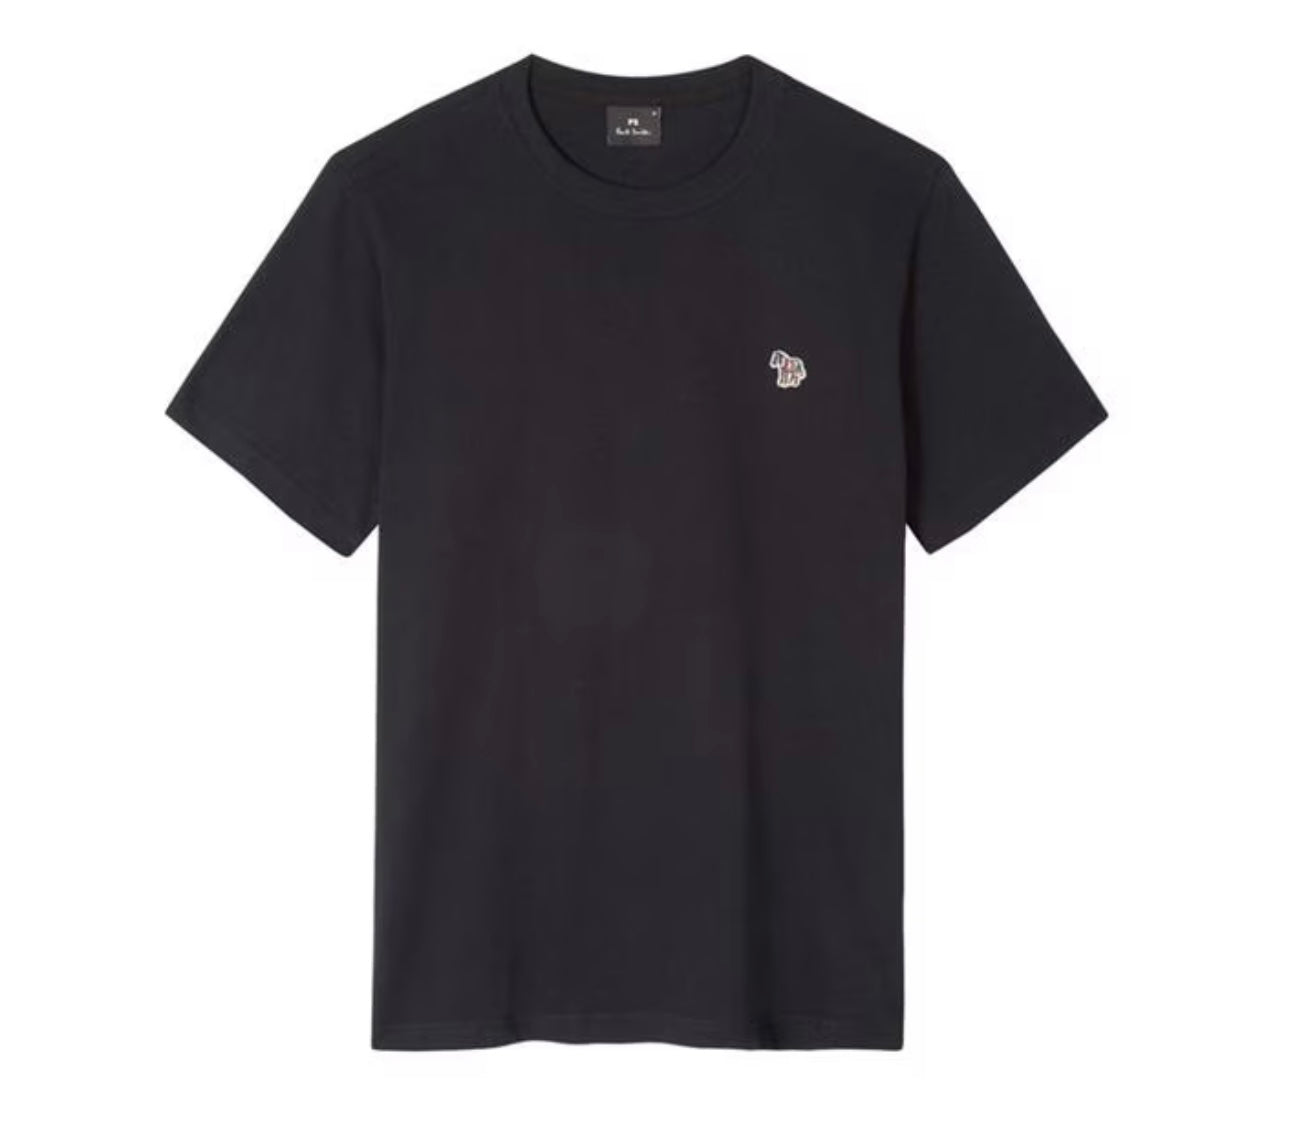 PAUL SMITH EMBROIDERED ZEBRA T-SHIRT NAVY BLUE